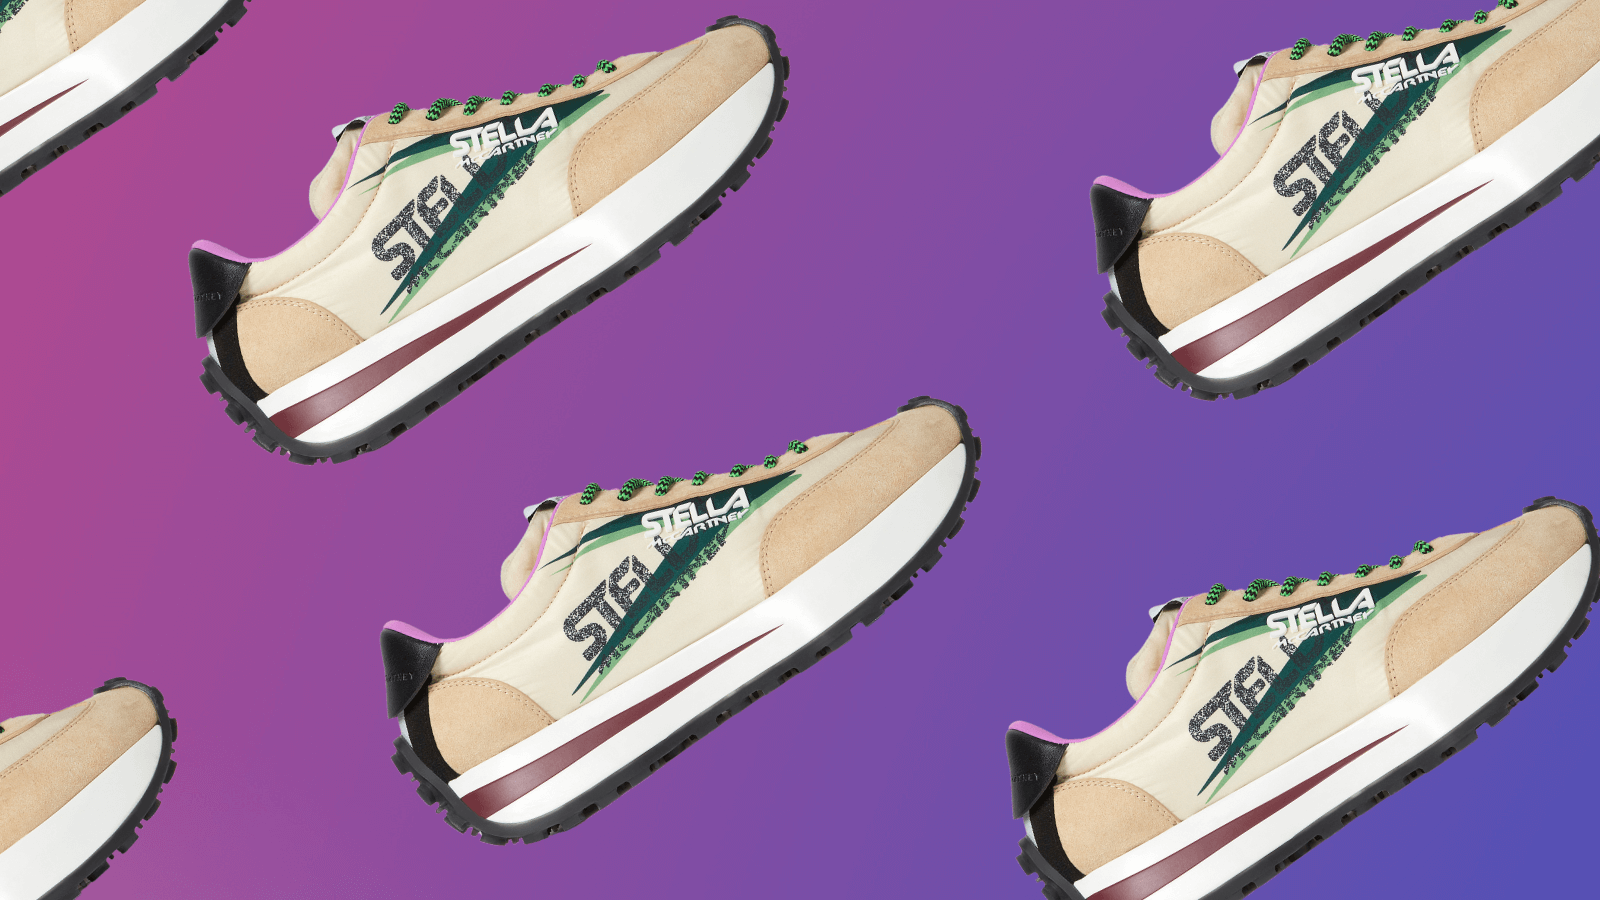 Stella McCartney Debuts Sustainable Vegan Sneakers Made With Recycled Fishing Nets